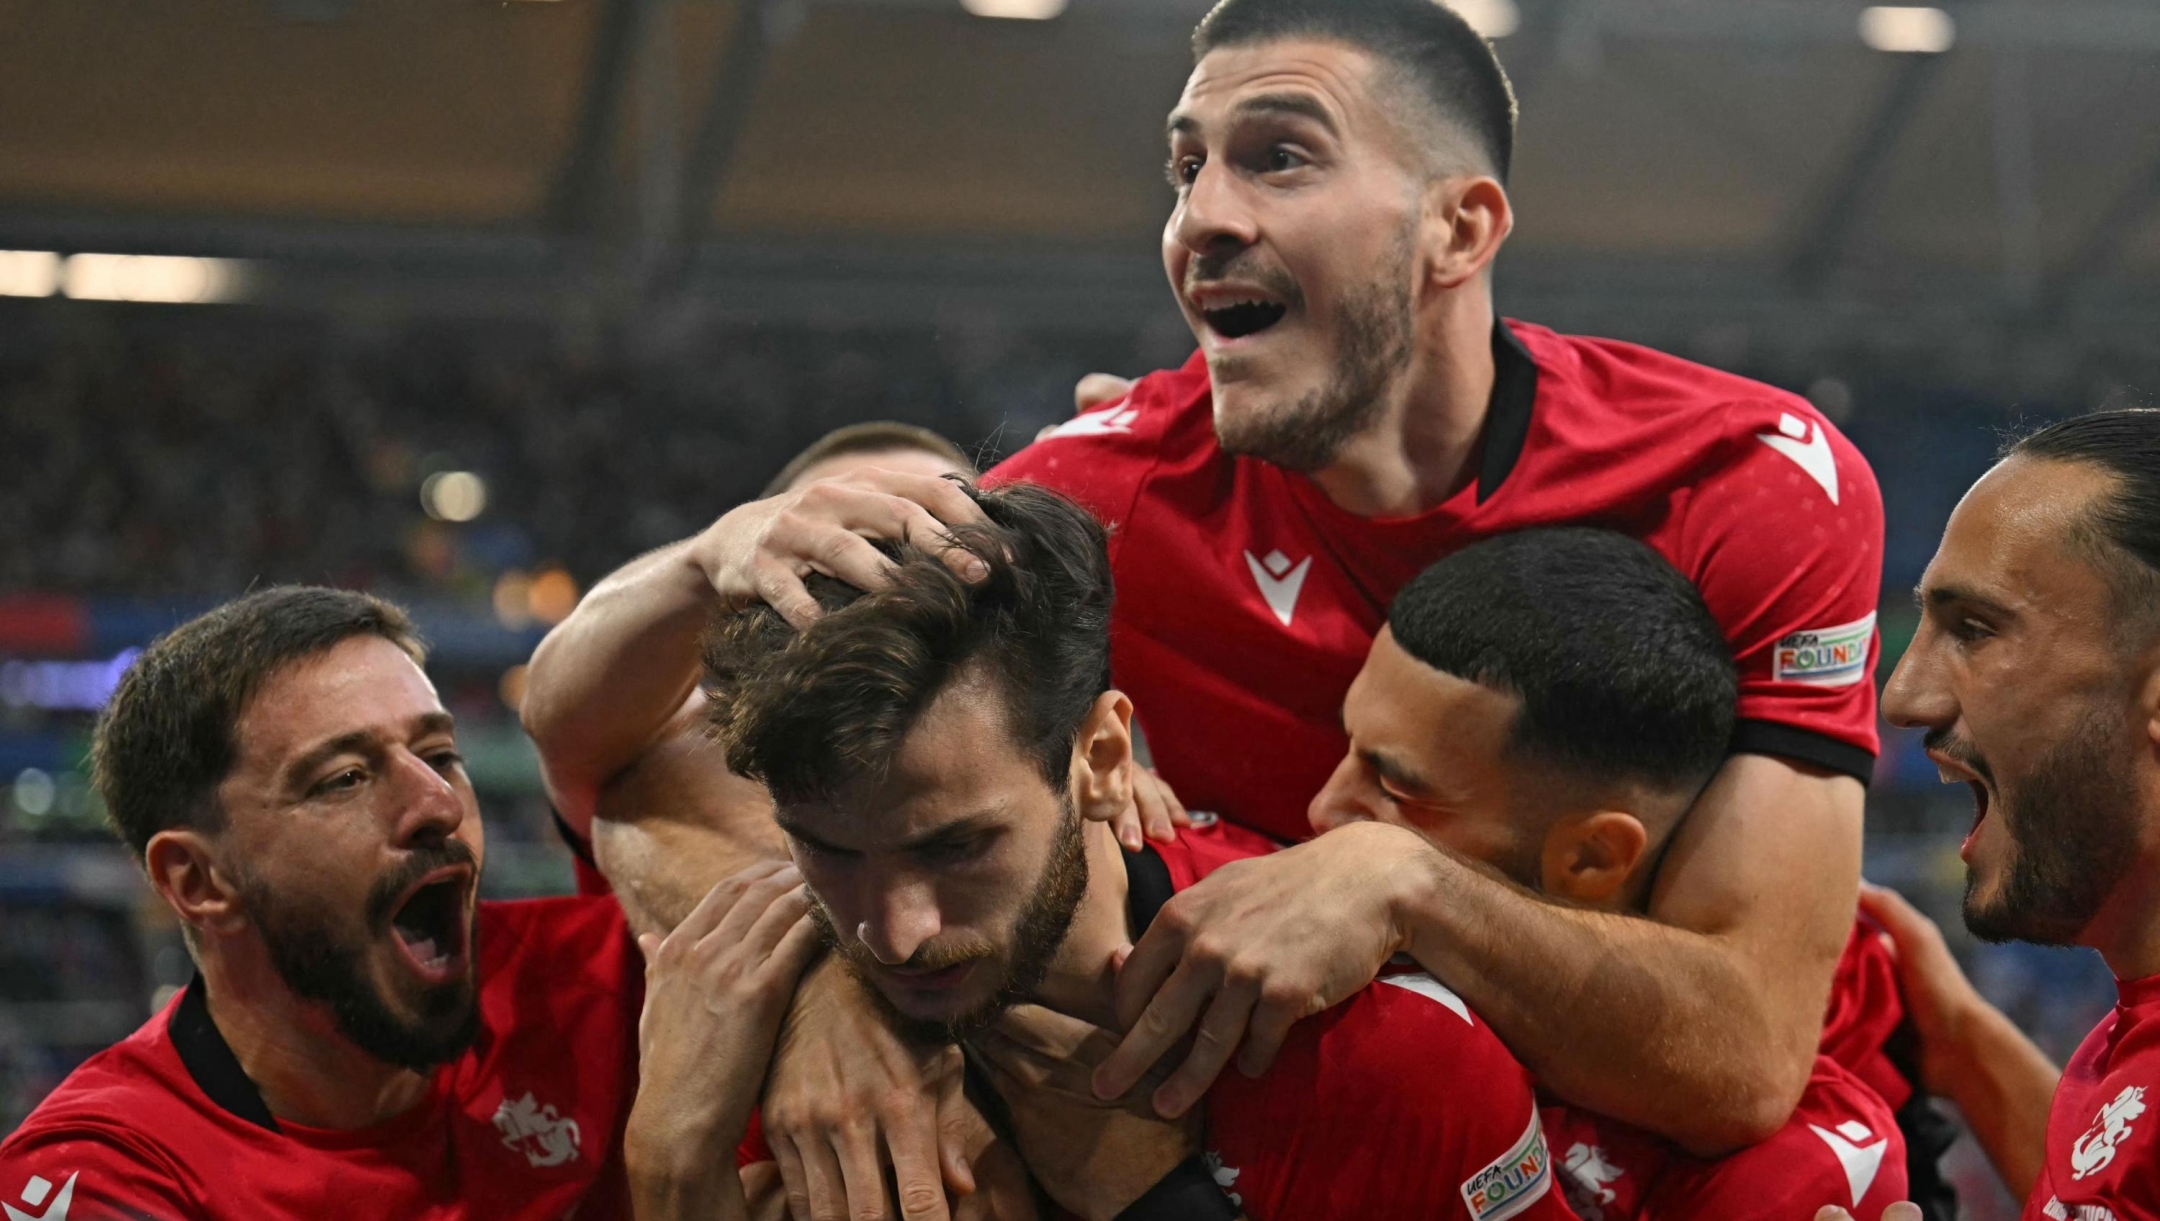 Georgia's forward #07 Khvicha Kvaratskhelia celebrates scoring his team's first goal with his team mates during the UEFA Euro 2024 Group F football match between Georgia and Portugal at the Arena AufSchalke in Gelsenkirchen on June 26, 2024. (Photo by OZAN KOSE / AFP)